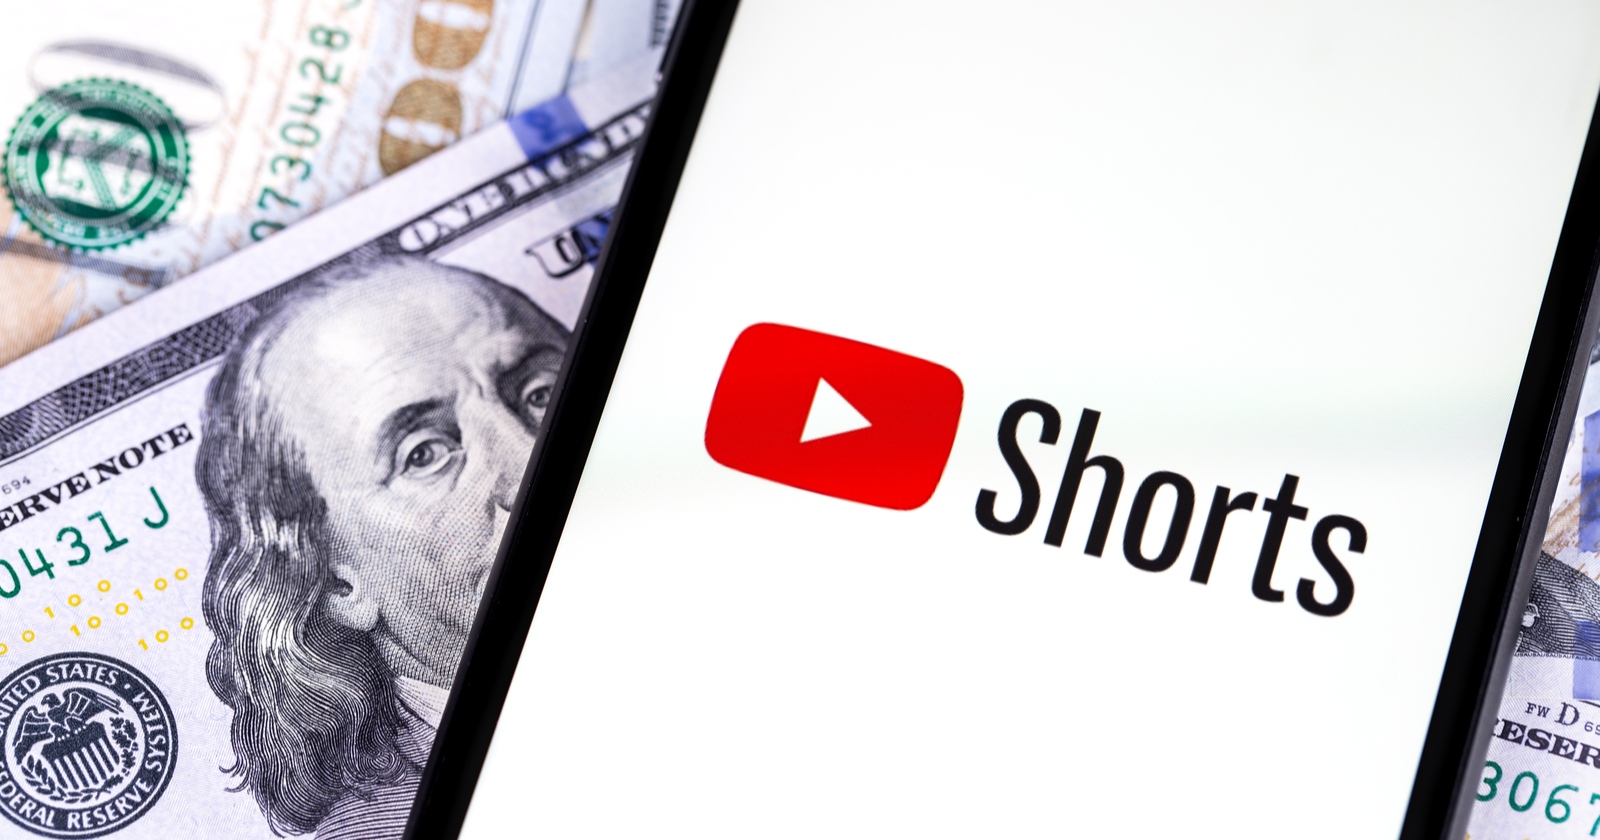 Youtube Confirms Shorts Views Don'T Count For Monetization